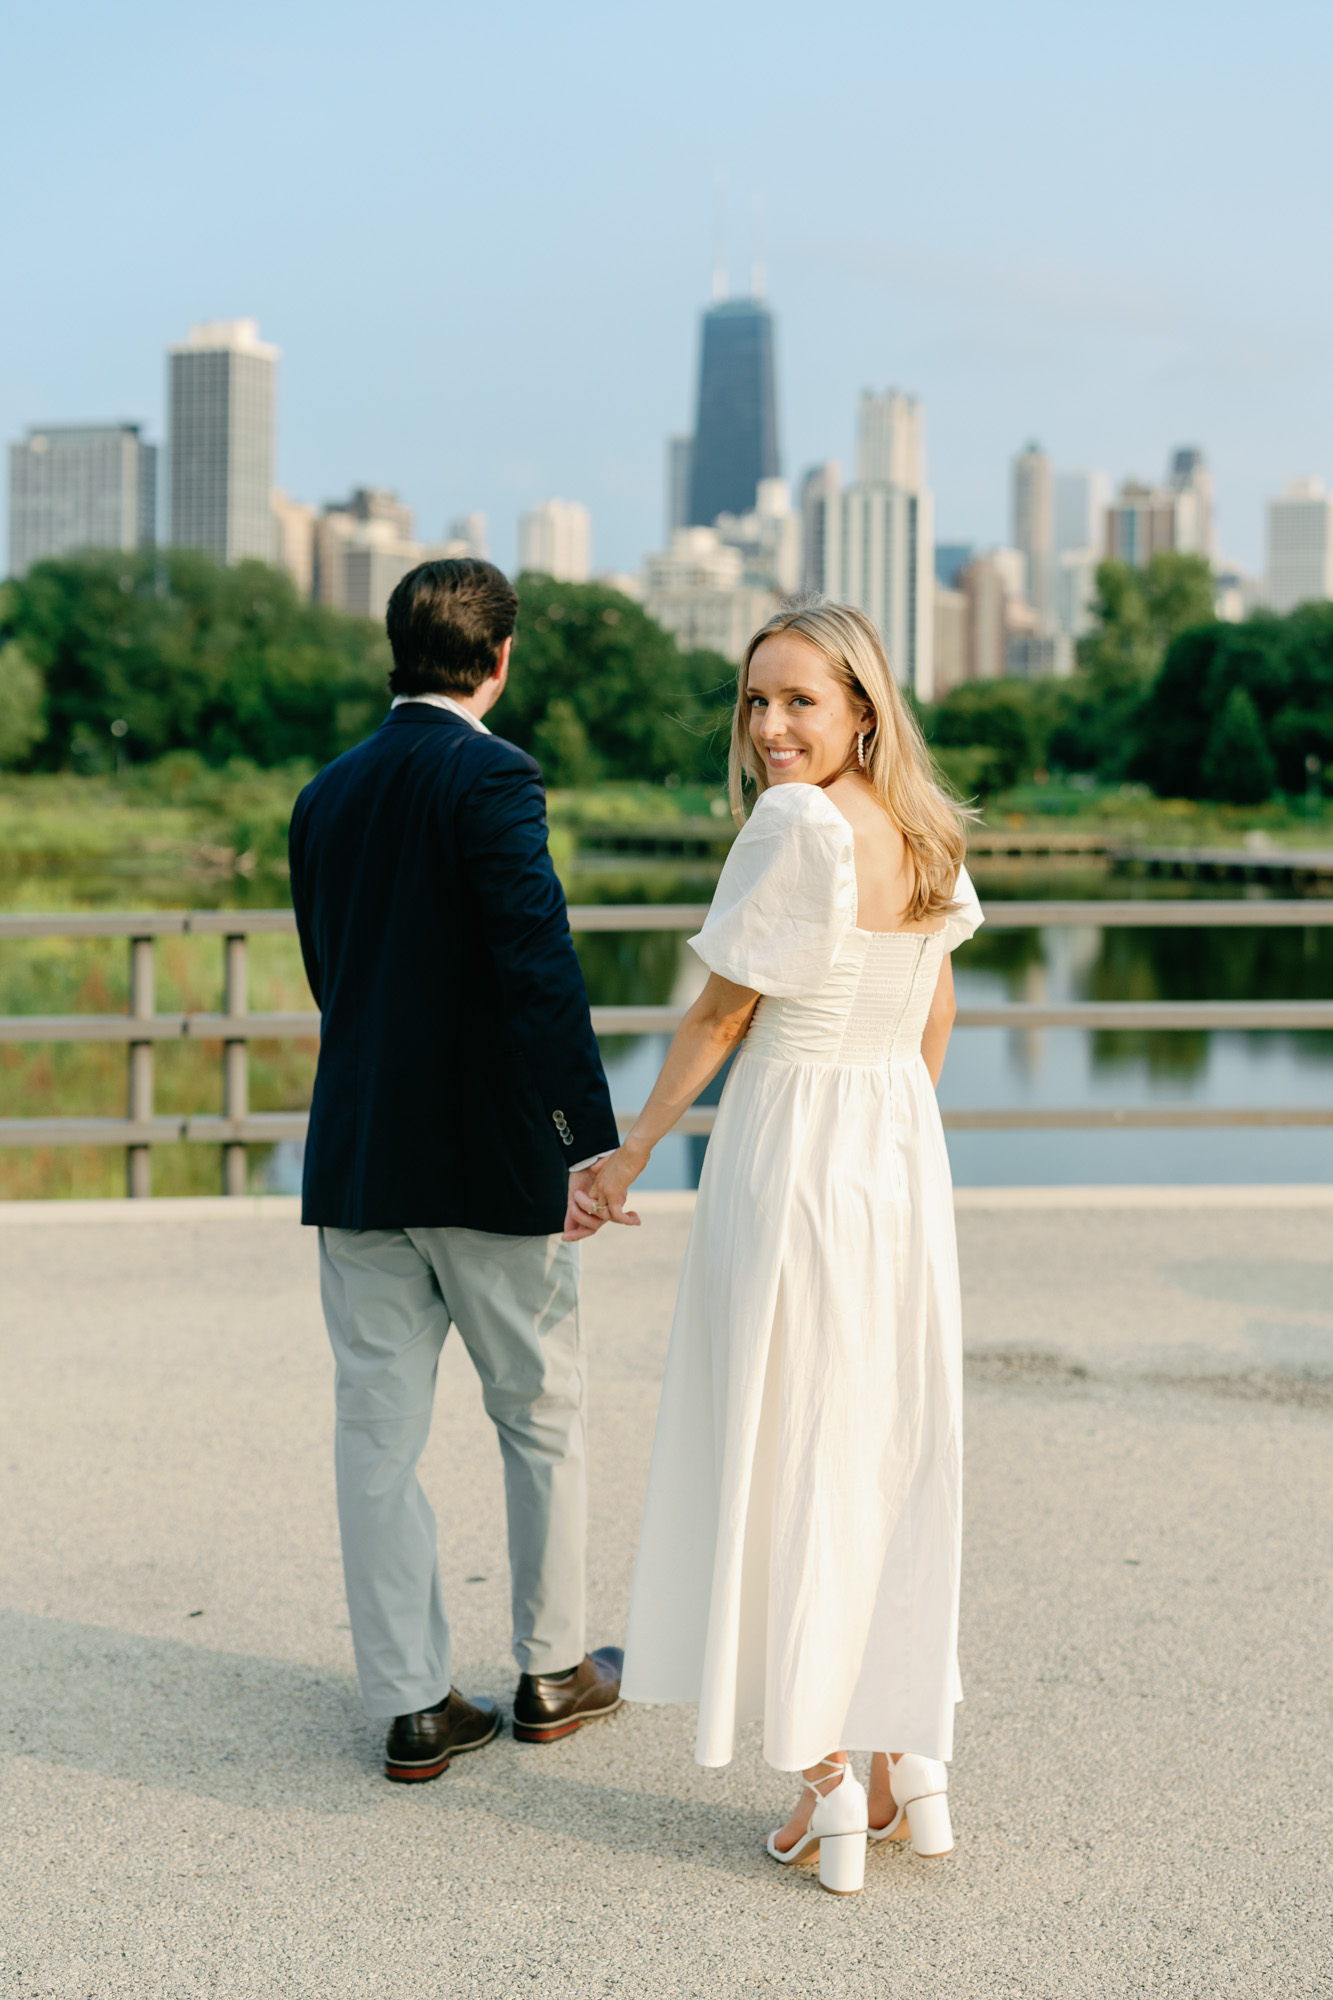 A bride smiles over her shoulder as she poses for an engagement photo with the Chicago skyline behind her.